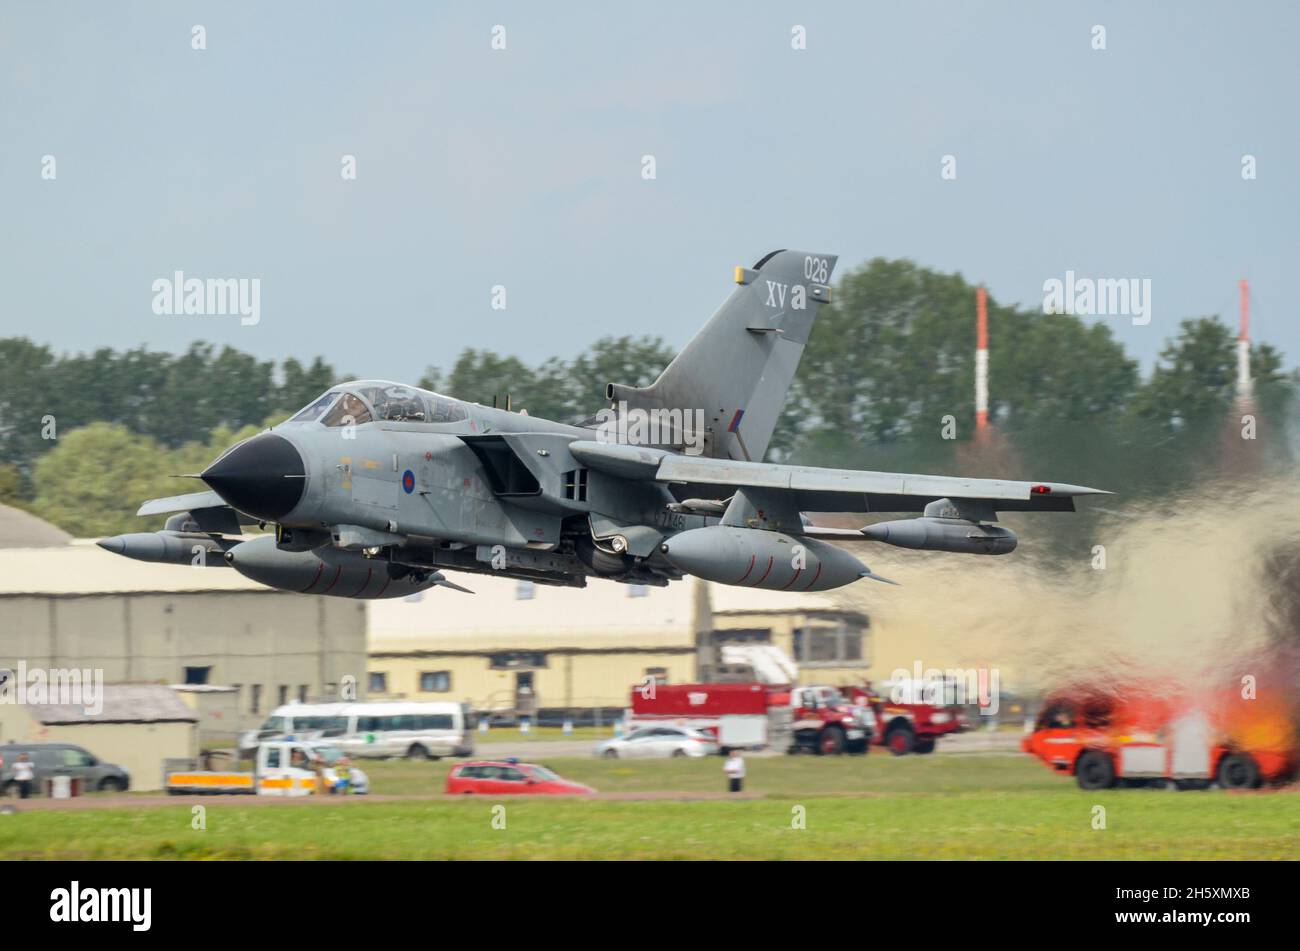 Royal Air Force Panavia Tornado GR4 fighter bomber jet plane keeping low after take off at Royal International Air Tattoo, RAF Fairford airshow Stock Photo